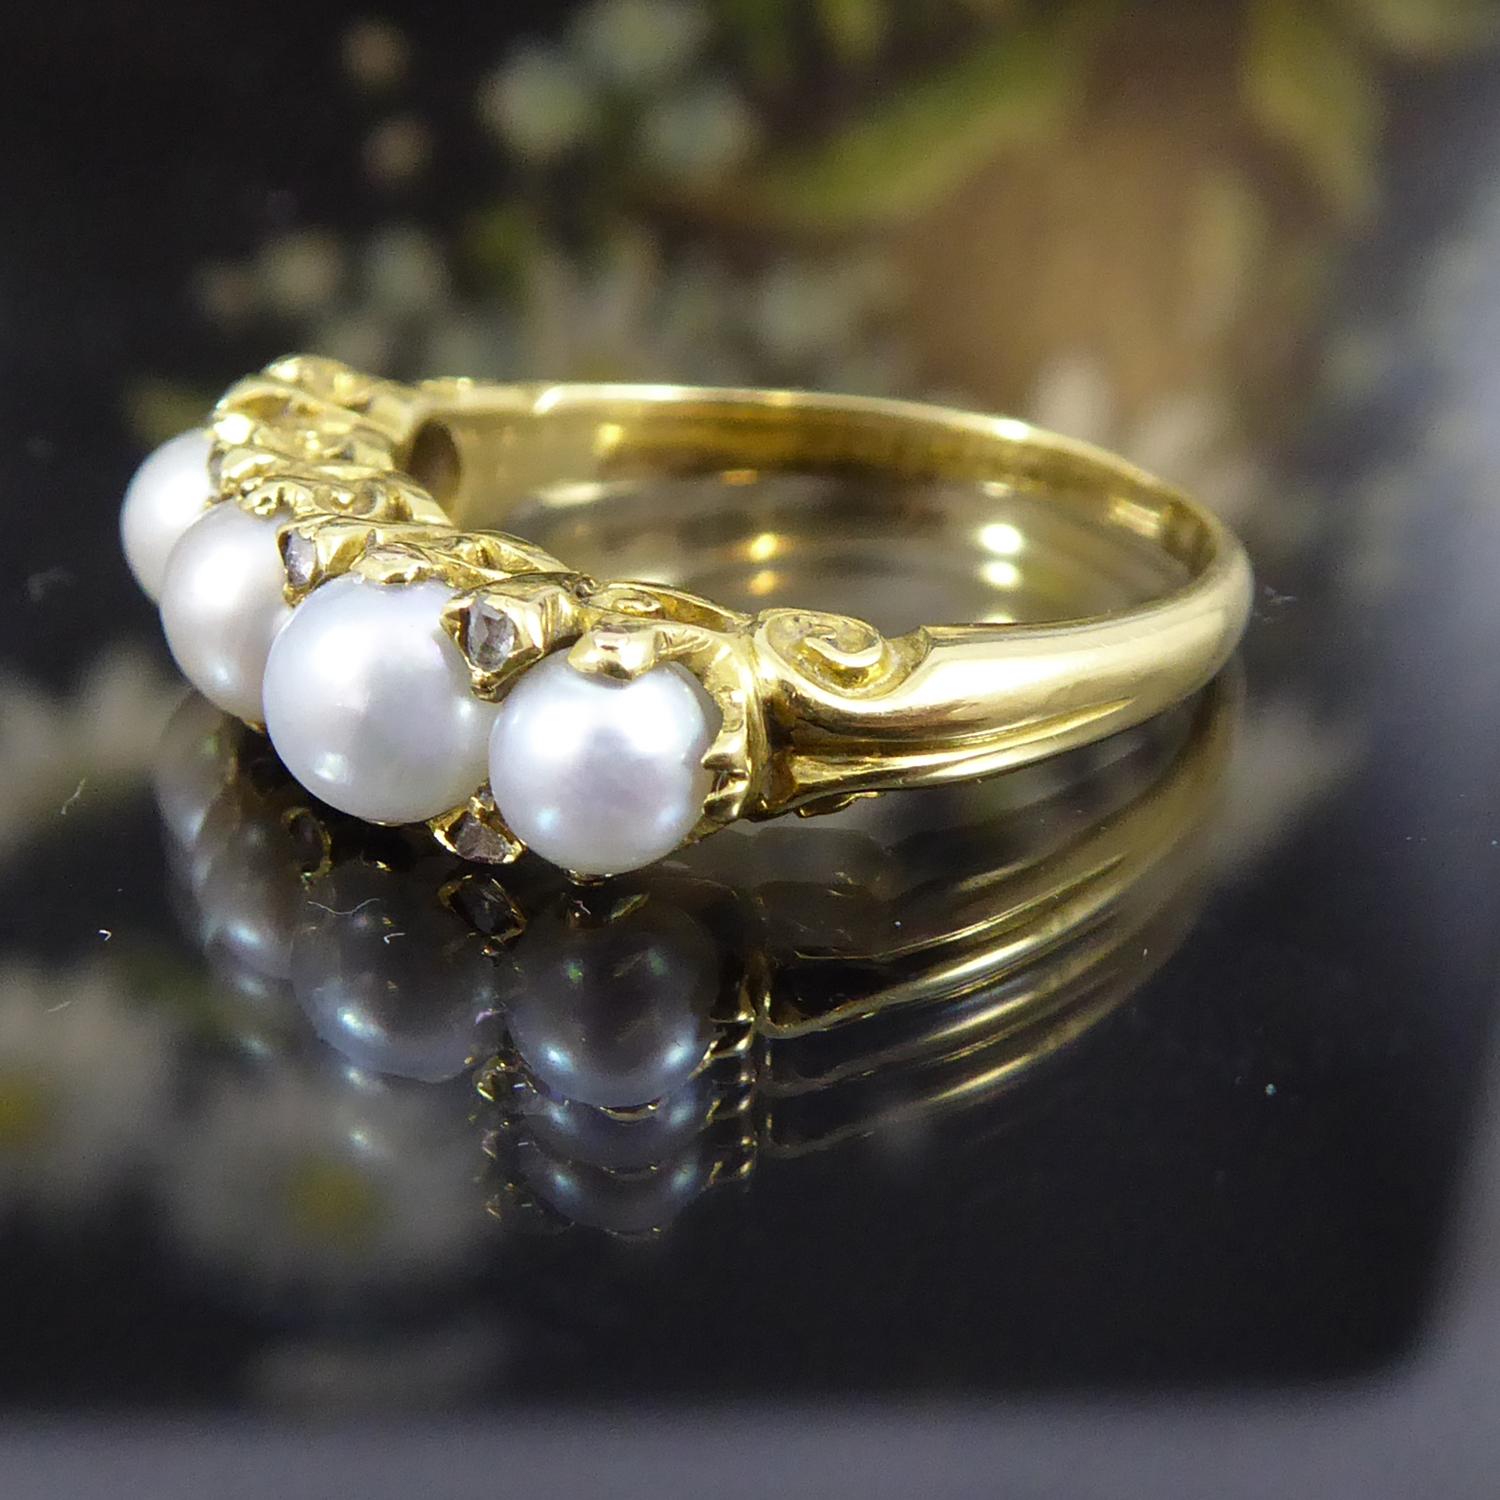 Women's Antique Edwardian Ring Set with Diamonds and White Pearls in Yellow Gold